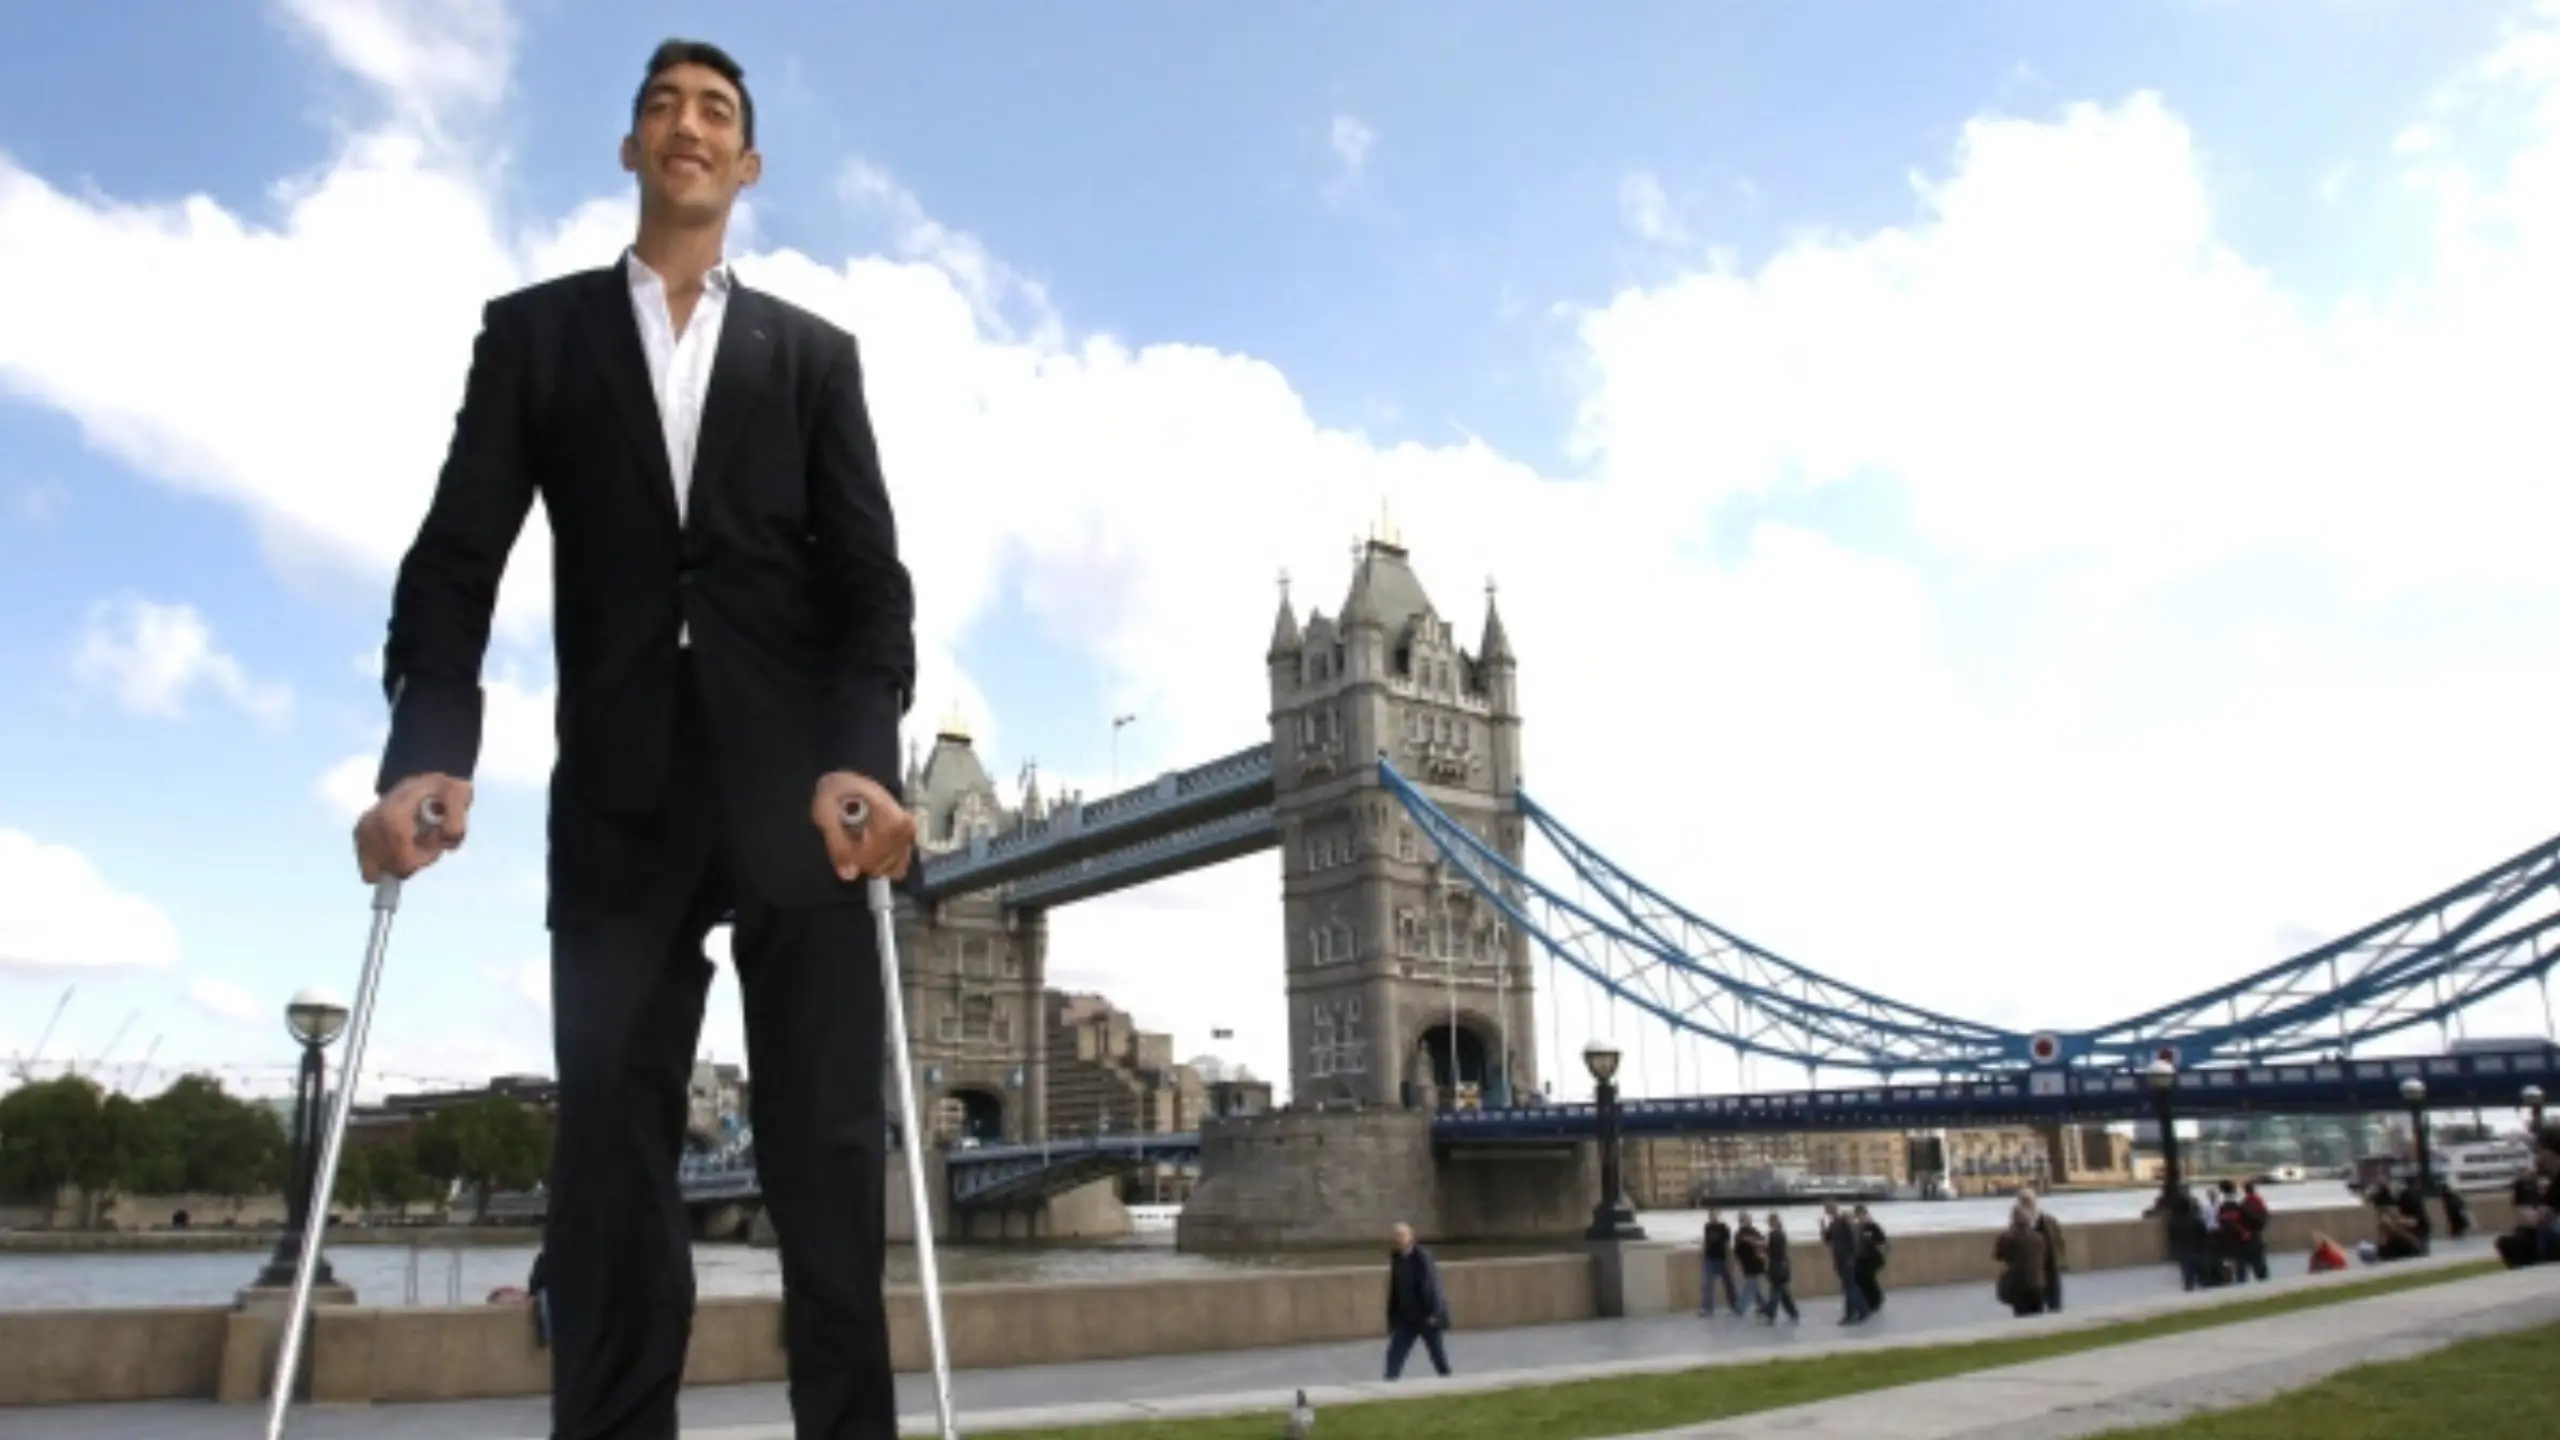 The Tallest Man in the World A Remarkable Journey